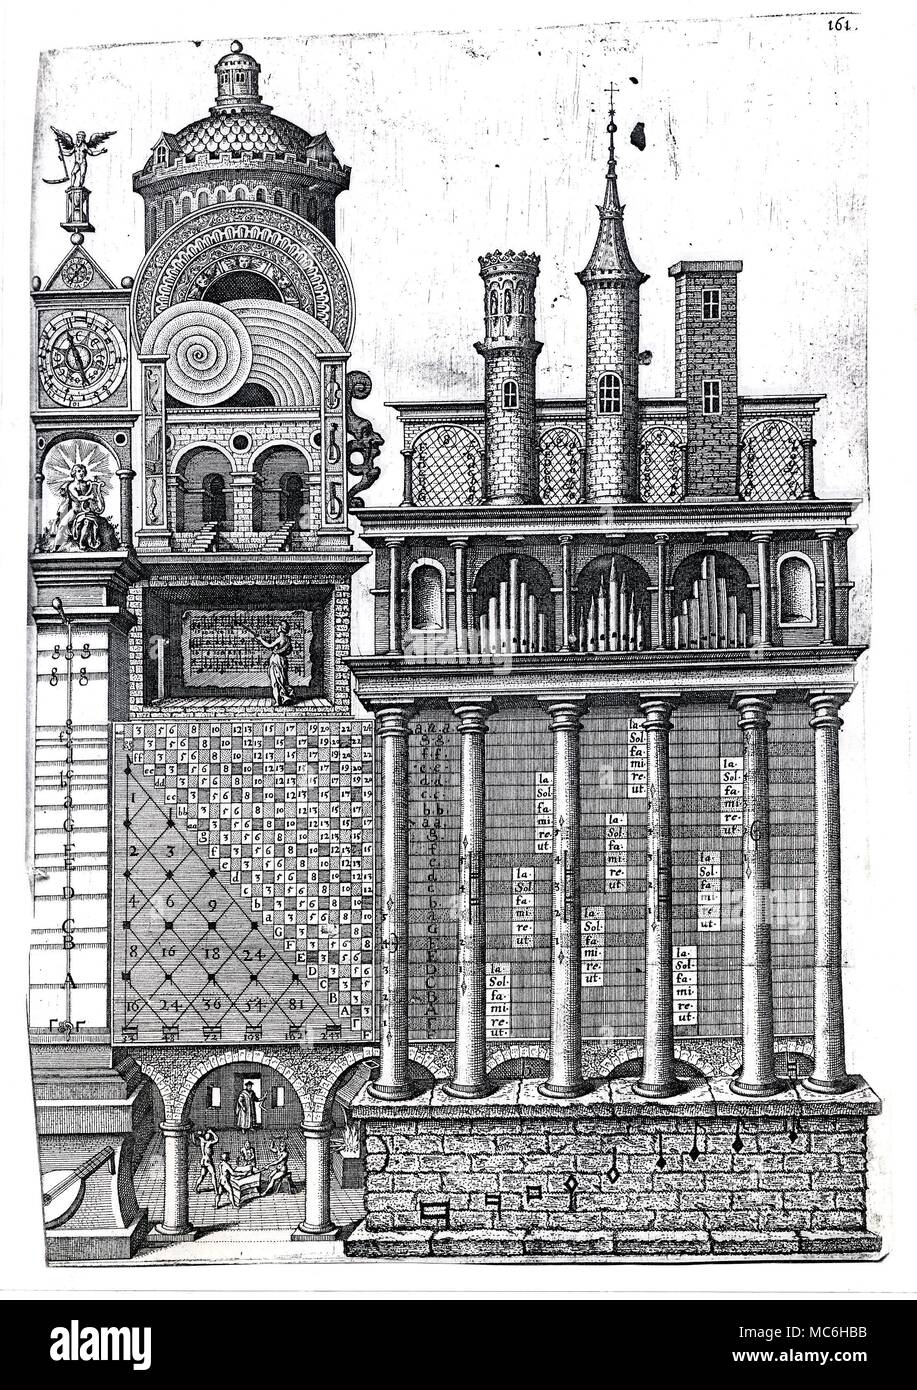 TEMPLE OF MUSIC A vast edifice in praise of the Pythagorean harmonics, intellectually expressed in ratios and mathematics, but sounded as music. An excellent account of this complex figure is given by Joscelyn Godwin, Robert Fludd. Hermetic Philosopher and Surveyor of Two Worlds, 1991 edn., pp. 78-9. The engraving is from From Robert Fludd, Utriusque Cosmi Historia (De Naturae Simia Seu Technica...) 1619 edn. Stock Photo